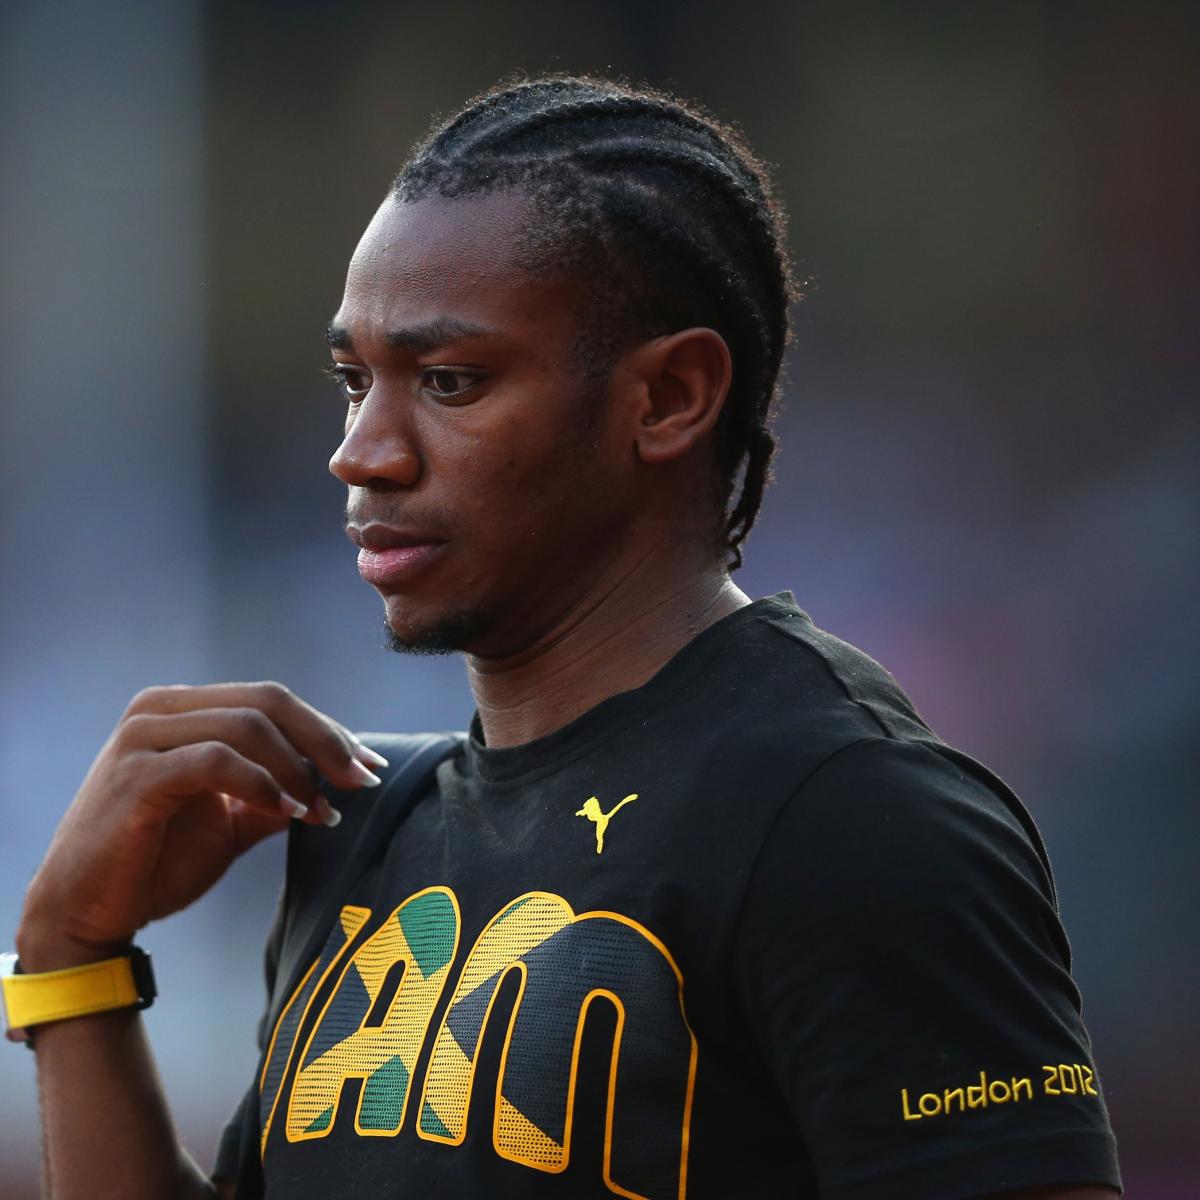 Olympics 2012: Yohan Blake's Silver Medals Will Be Joined by 4x100